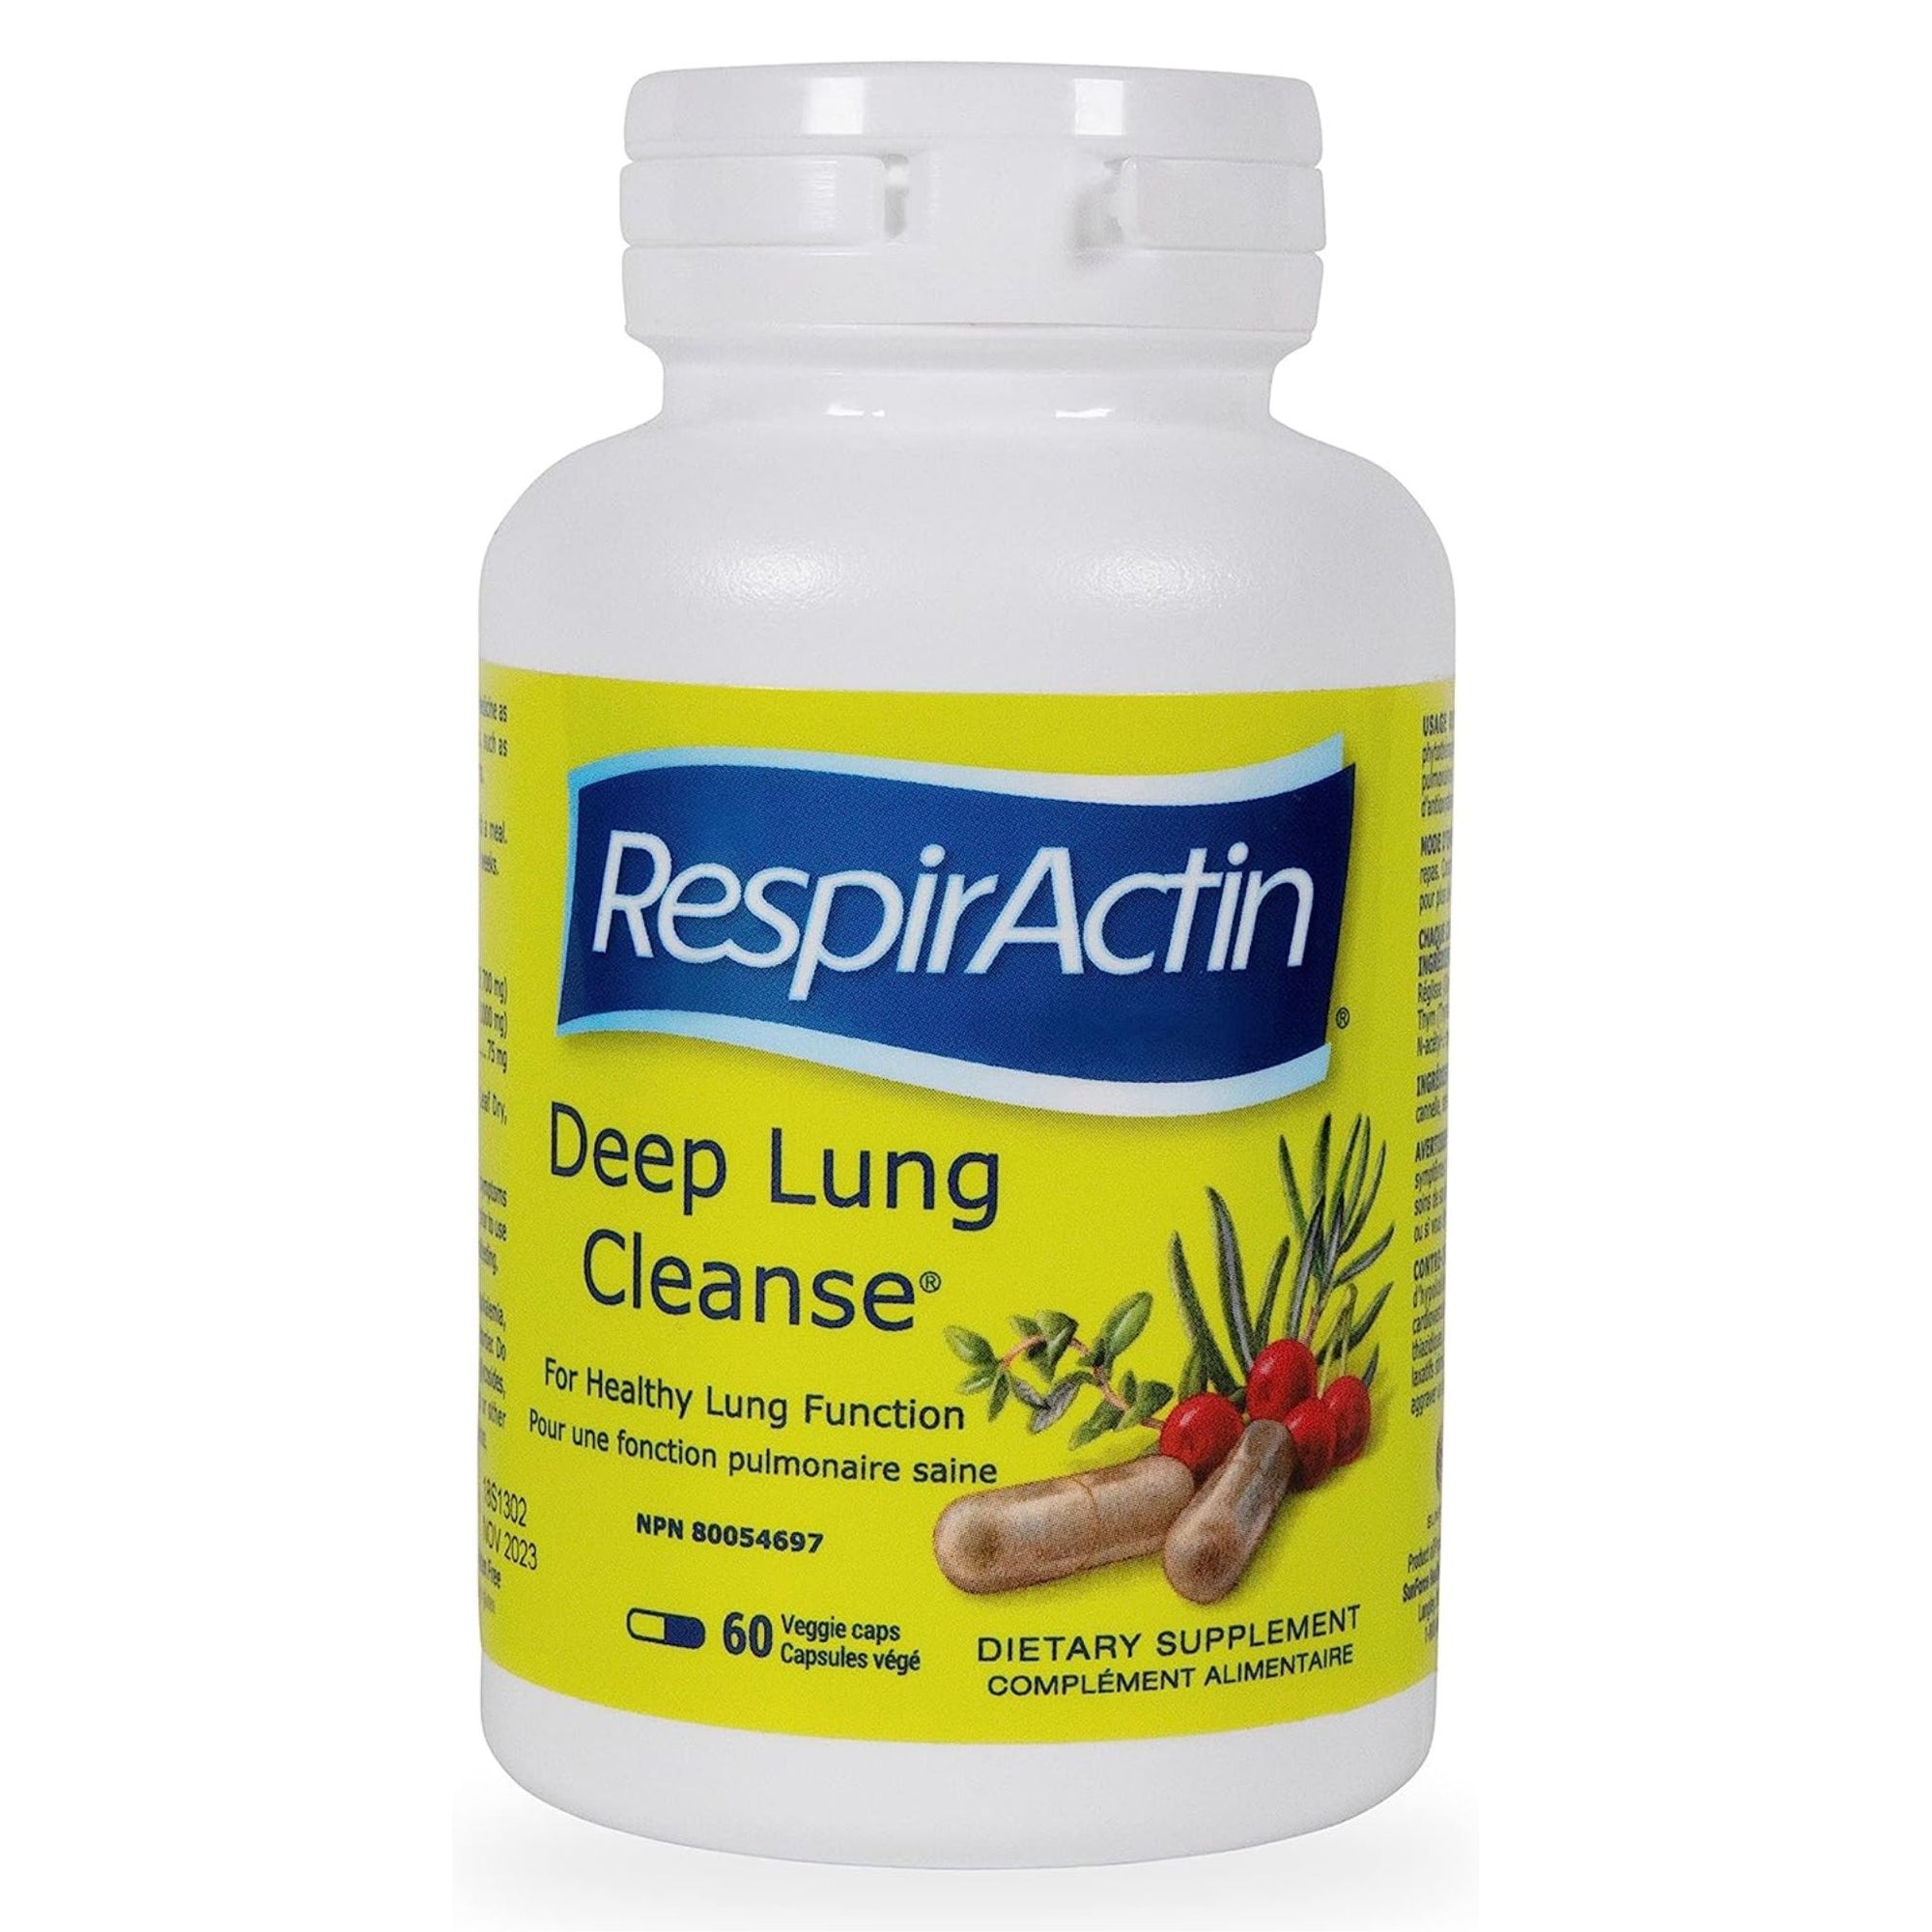 Image of Respiractin Deep Lung Cleanse 60 capsules, a natural supplement for respiratory health, available at Fiddleheads Health and Nutrition.